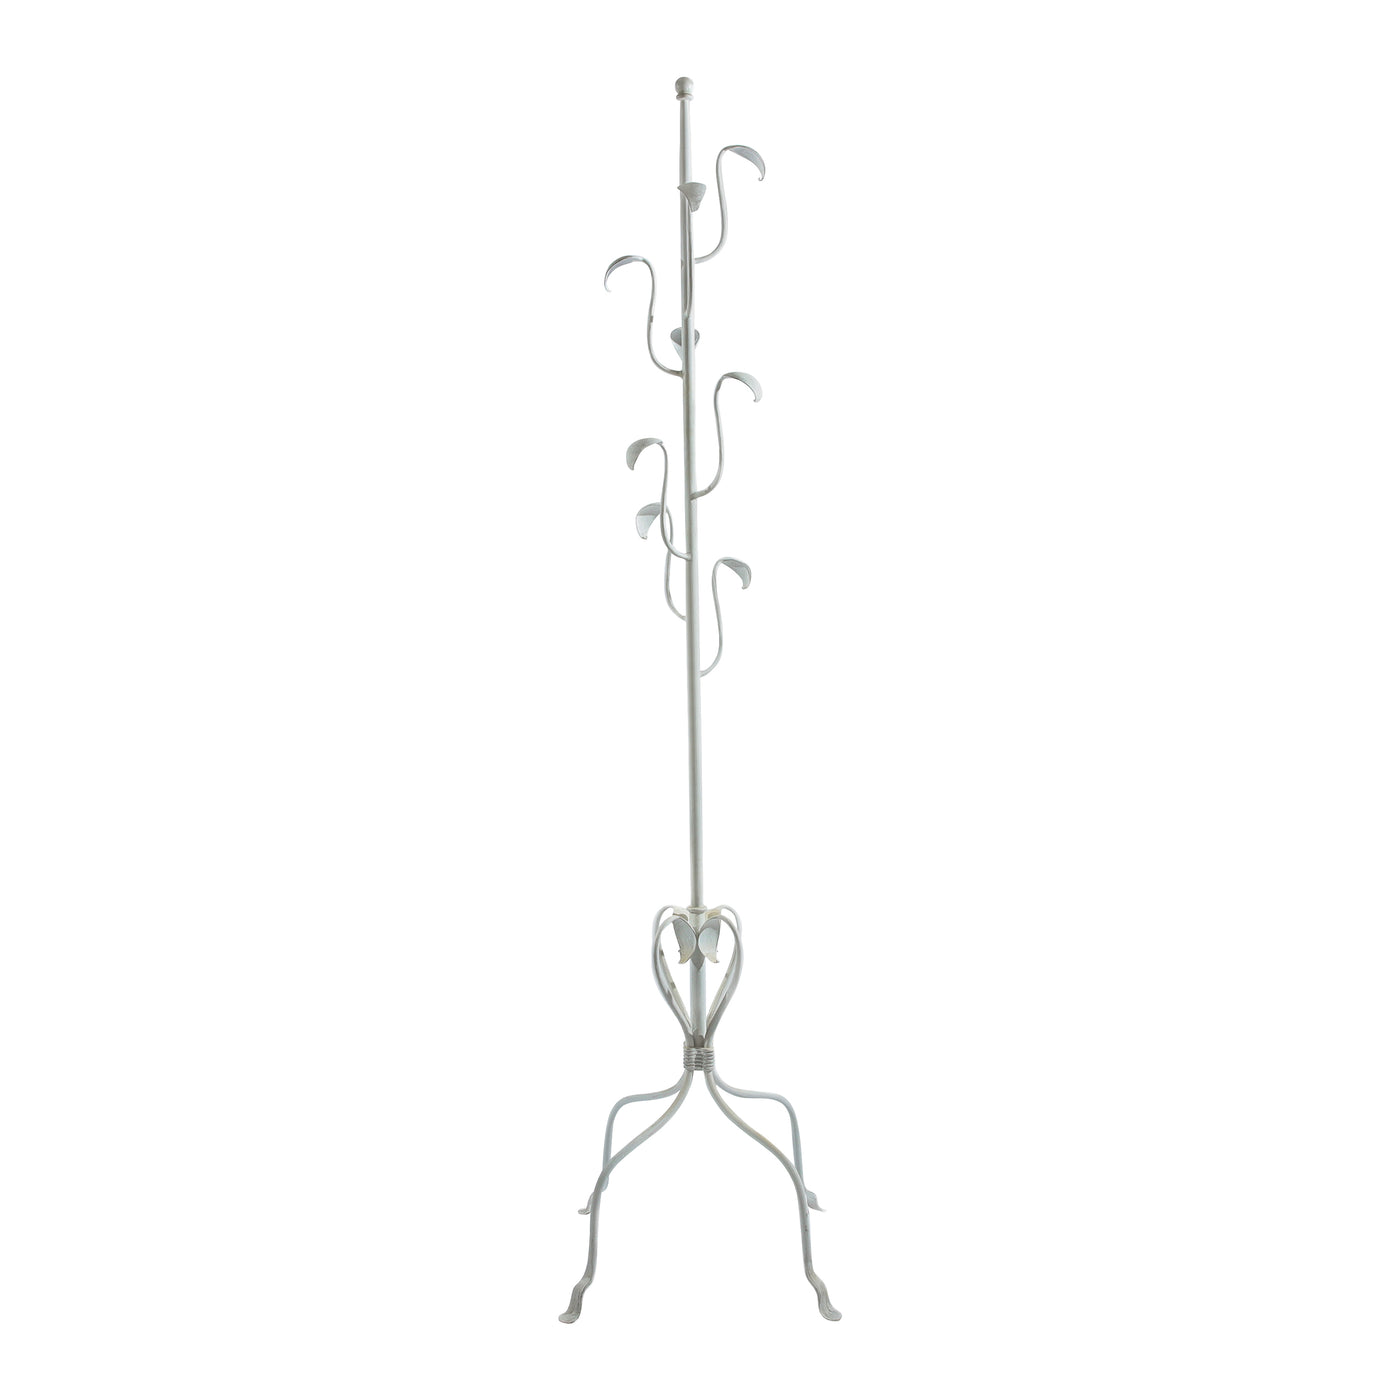 Unique metal forged clothes hanger stand with arms inspired by the branches of an aspen tree, painted in an antique white finish